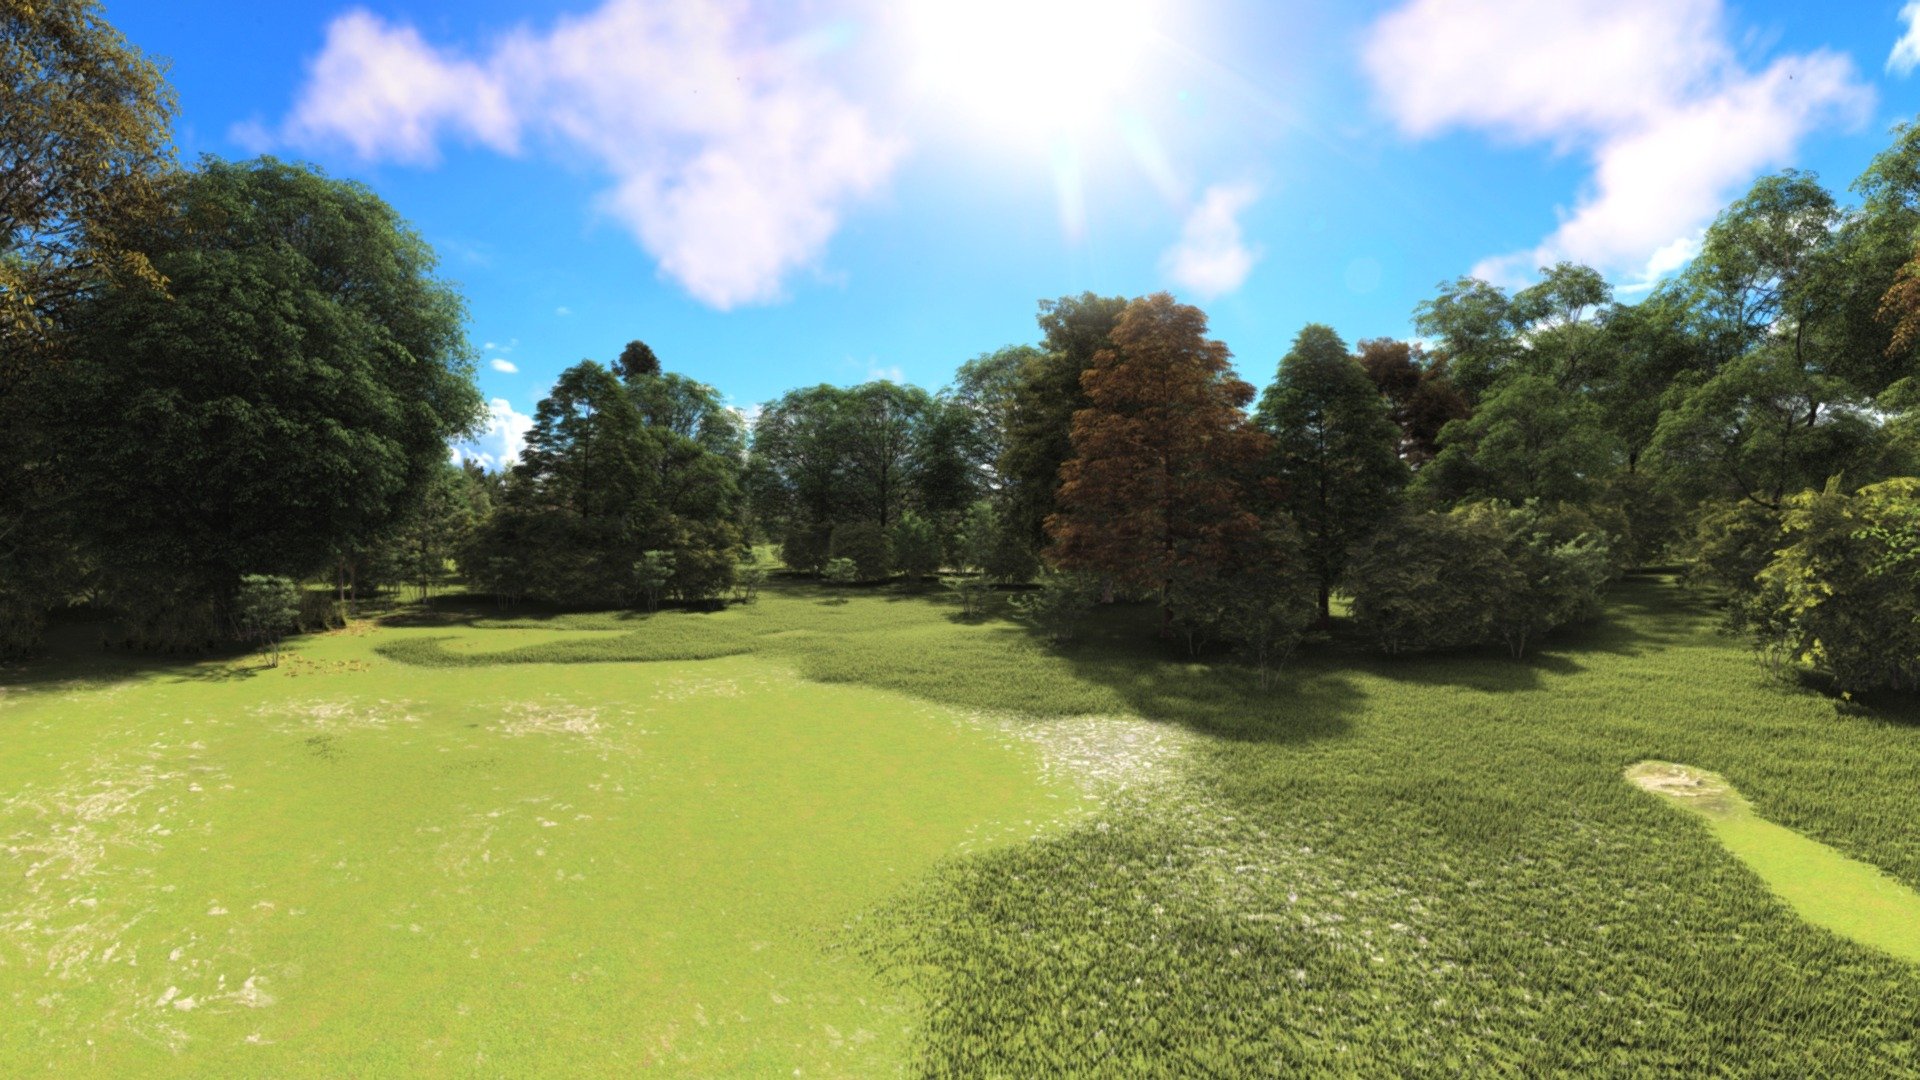 SKY BOX 8K - FOREST SCENE WITH CLEAR BLUE SKY

Used as a landscape cover in architectural, interior and landscape design software, used as hdri images, wallpaper… - SKY BOX 8K - FOREST SCENE WITH CLEAR BLUE SKY - Buy Royalty Free 3D model by Architecture_Interior 3d model